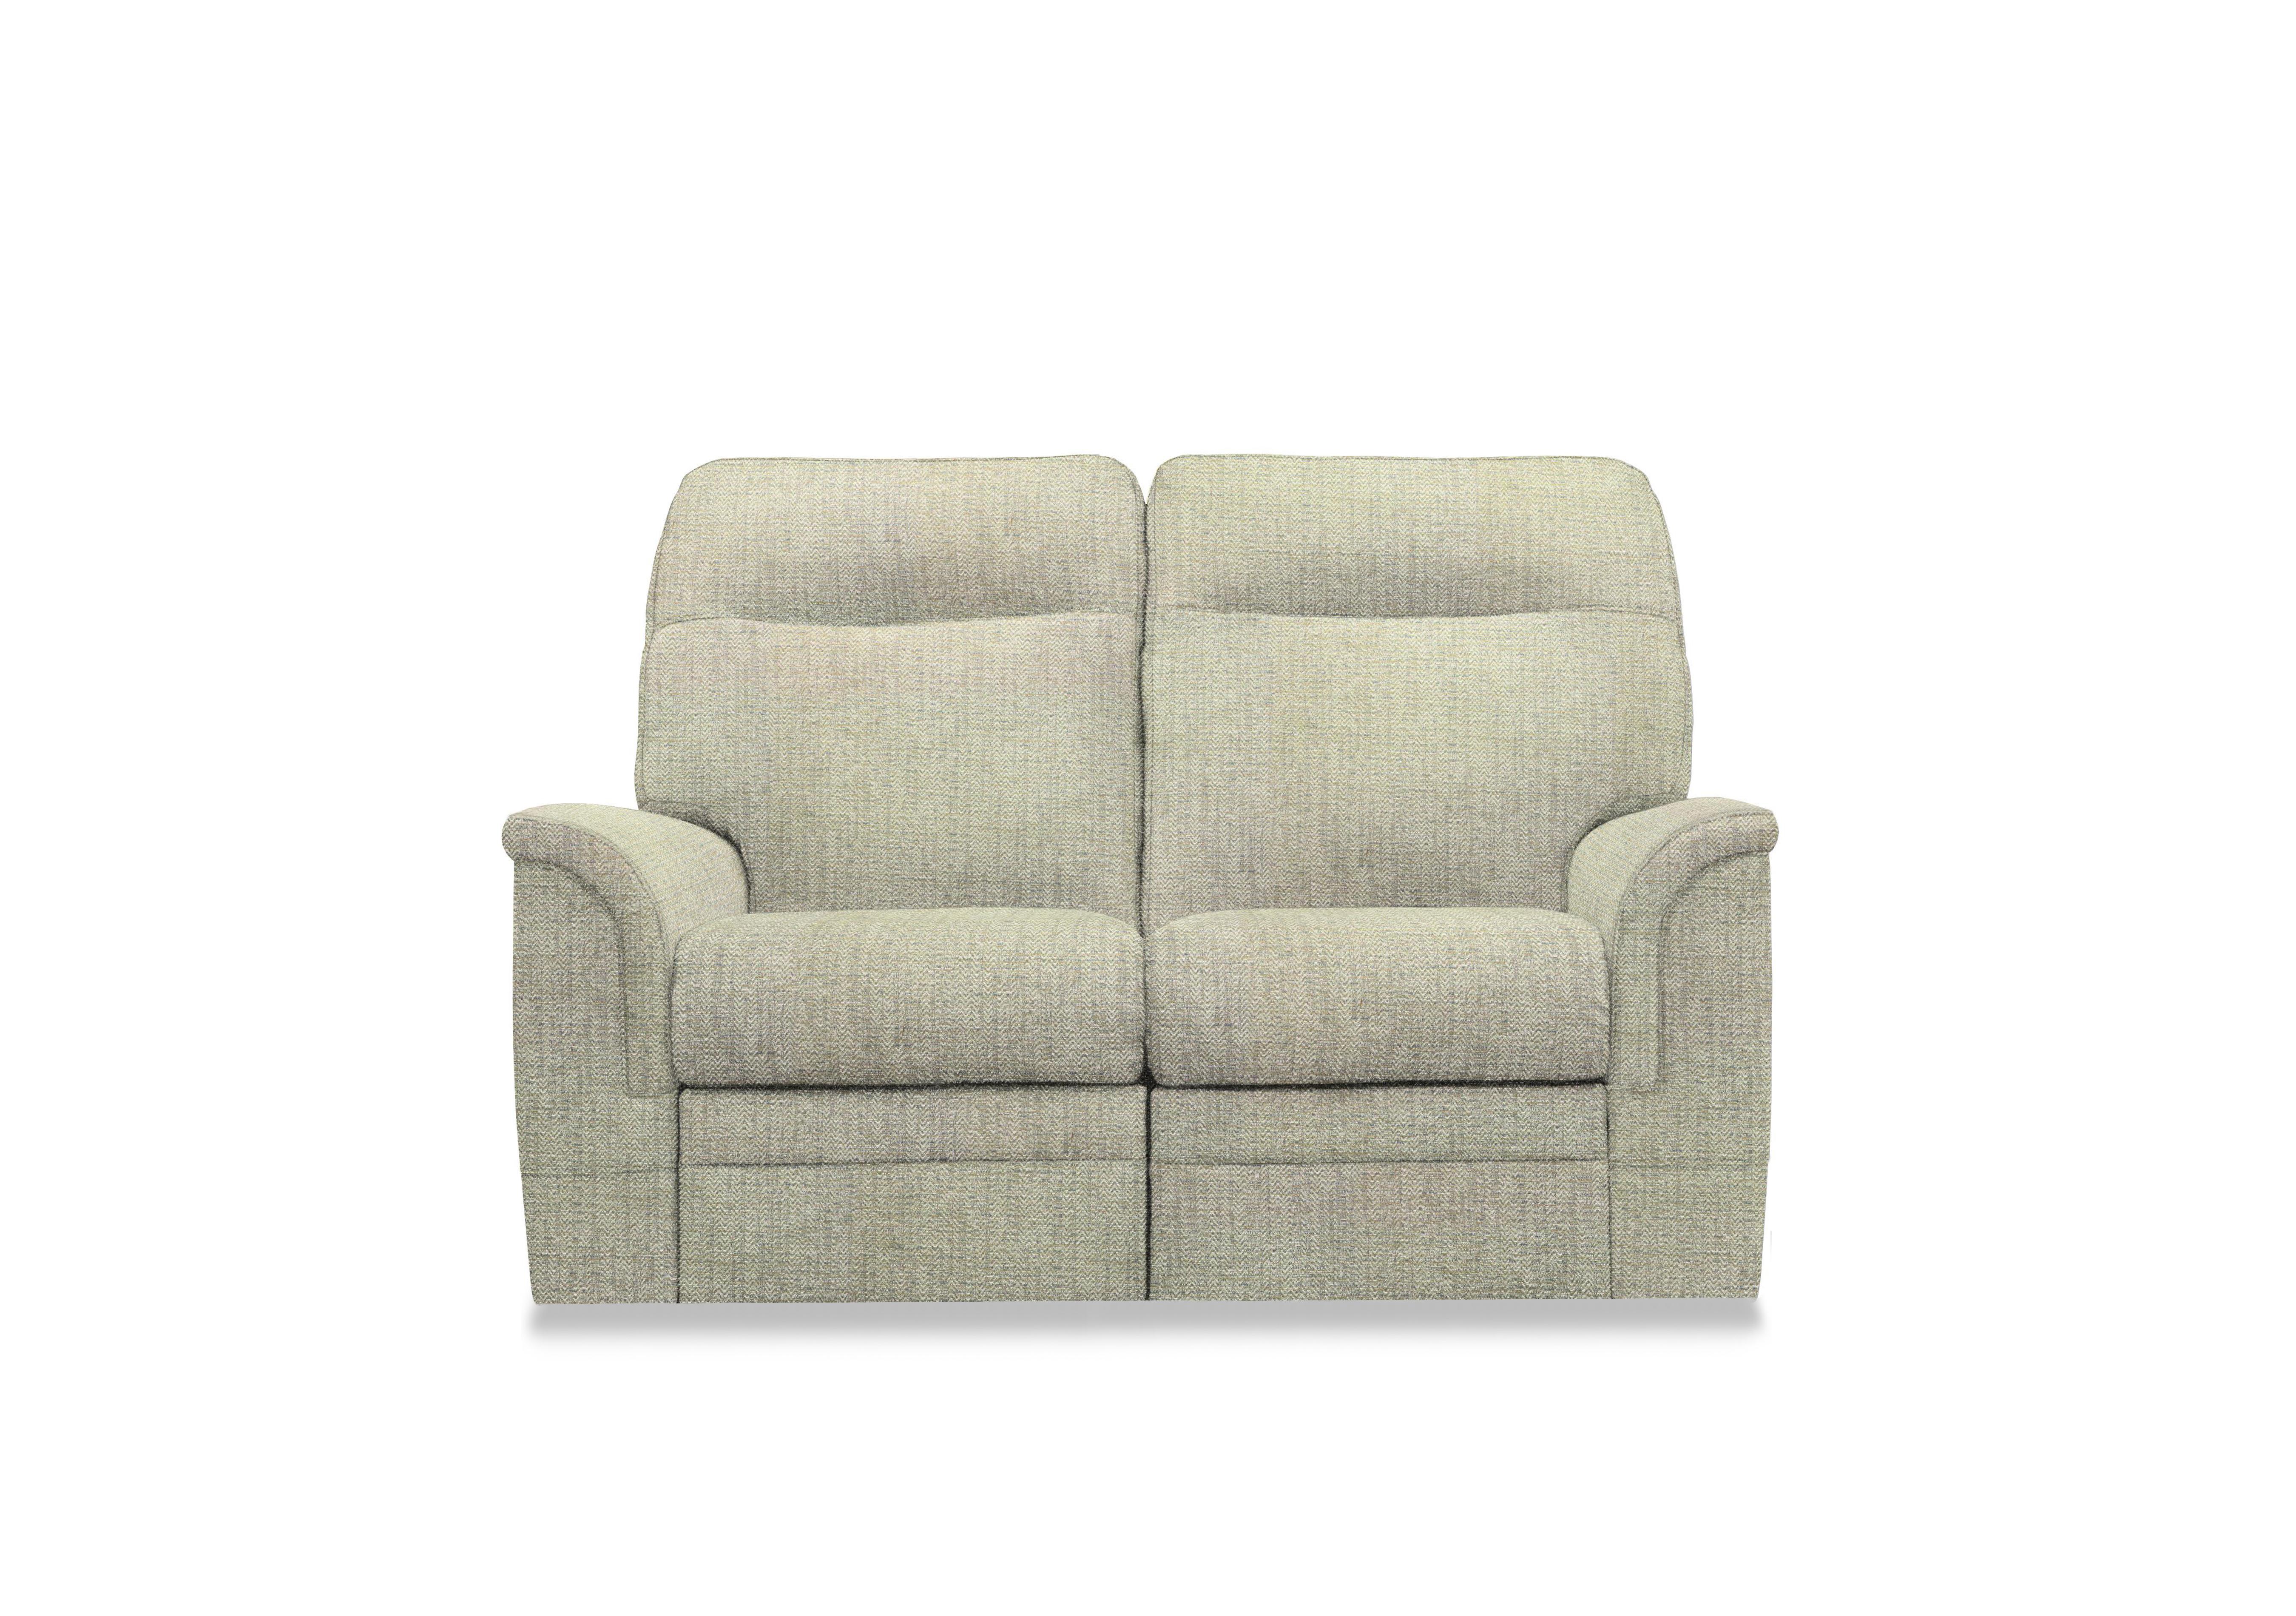 Hudson 23 Fabric 2 Seater Sofa in Cromwell Mint 001355-0069 on Furniture Village